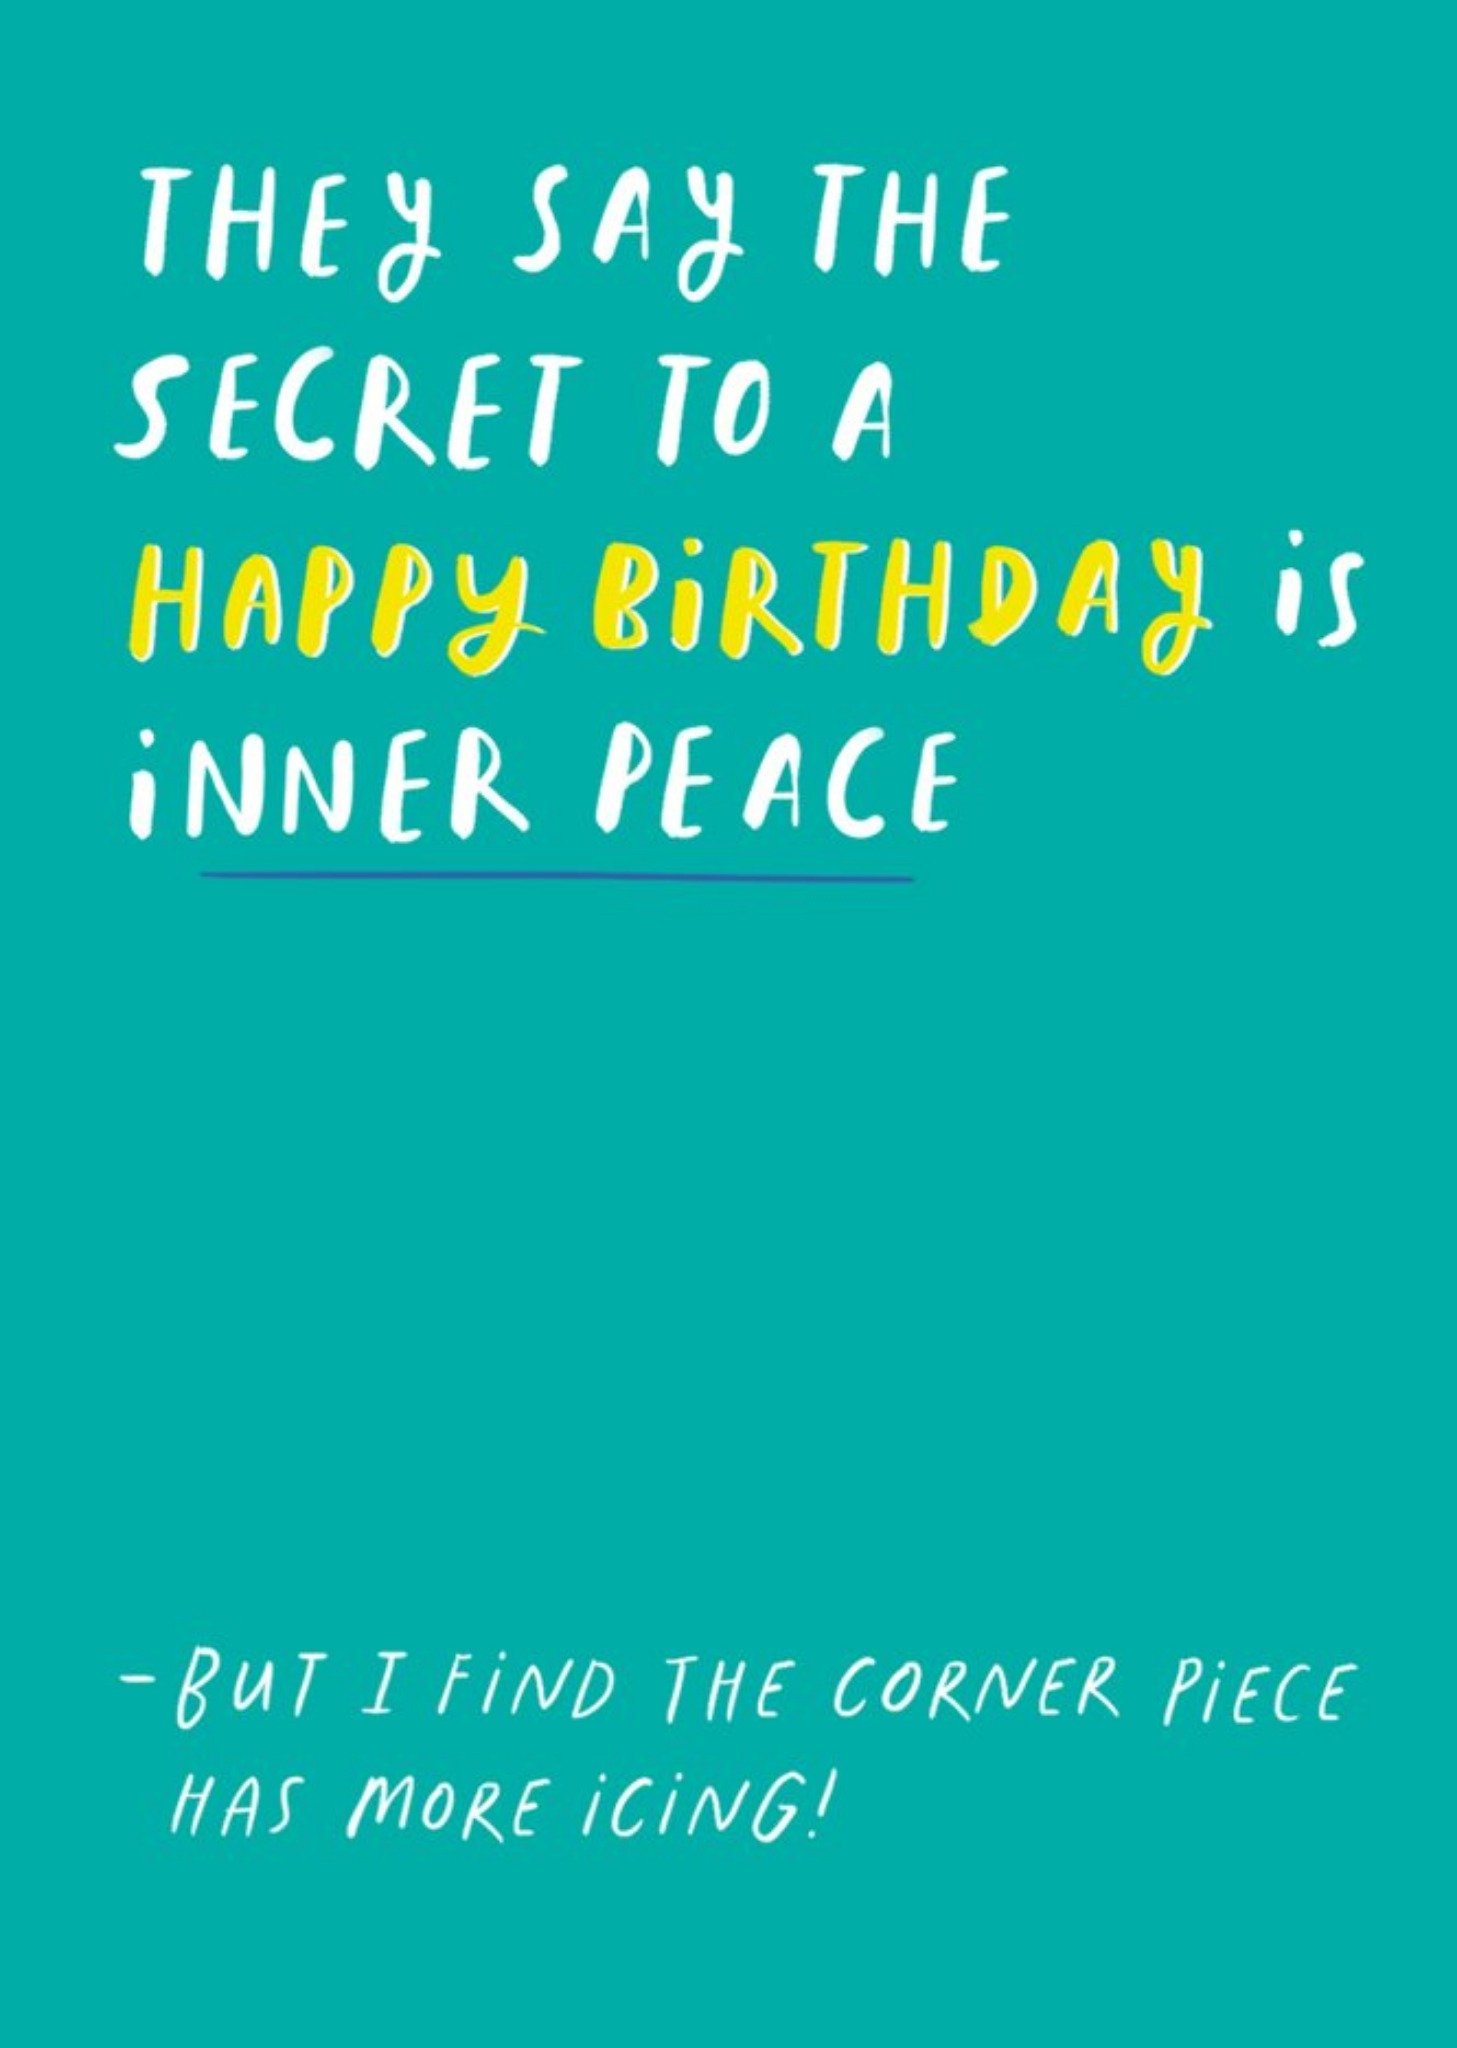 Moonpig Humourous Typography On A Teal Background Birthday Card, Large